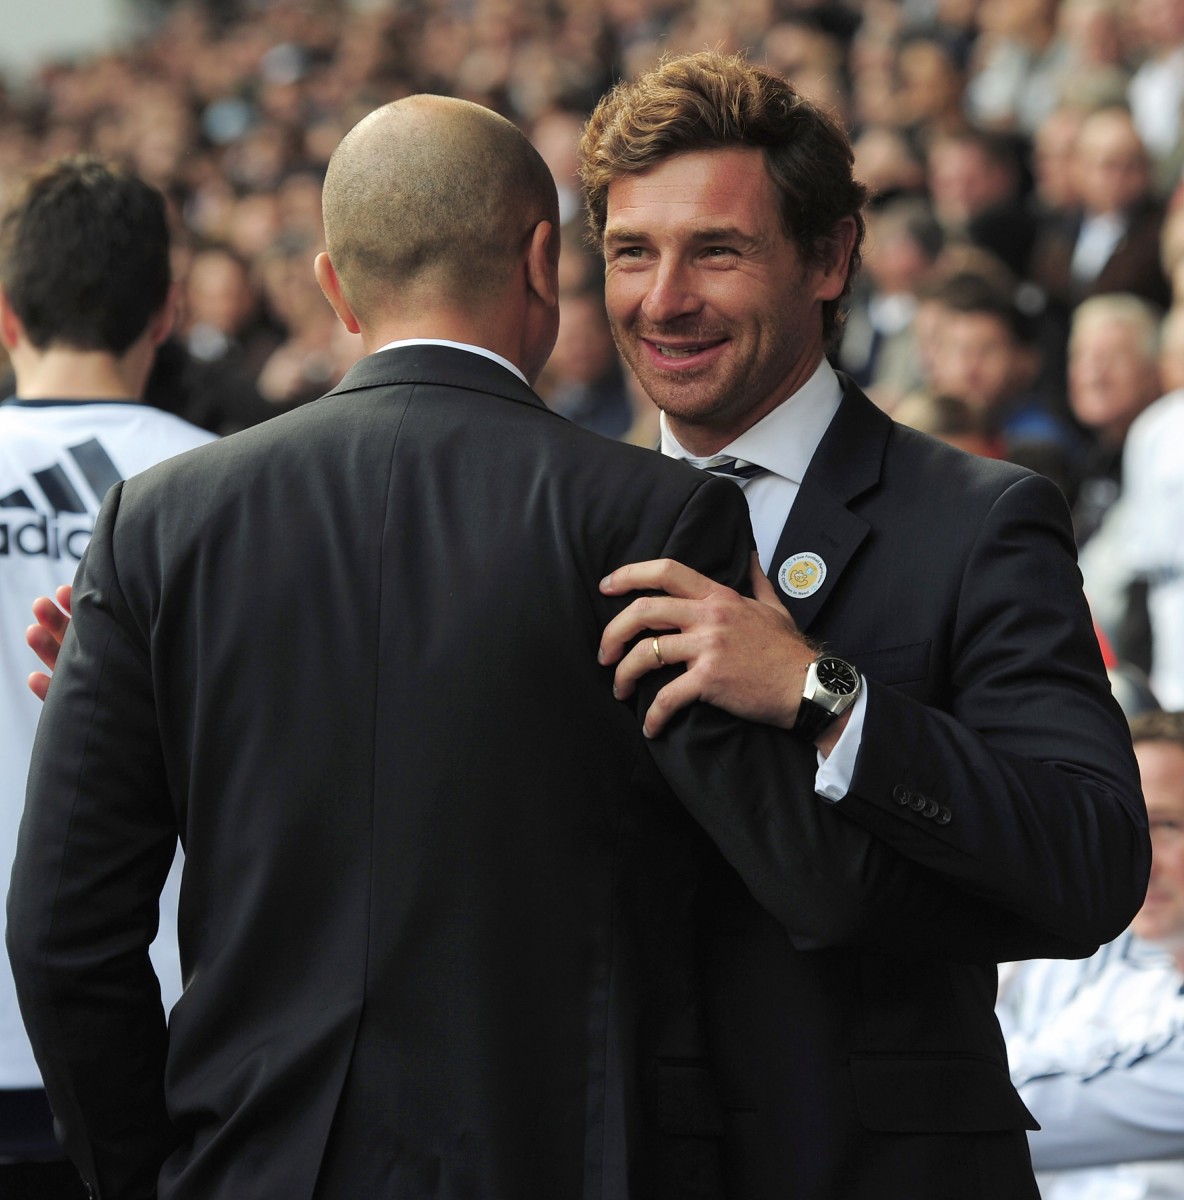 Tottenham manager Andre Villas-Boas greets Chelsea manager Roberto Di Matteo prior to their teams' clash on Saturday in the English Premier League. (Shaun Botterill/Getty Images)